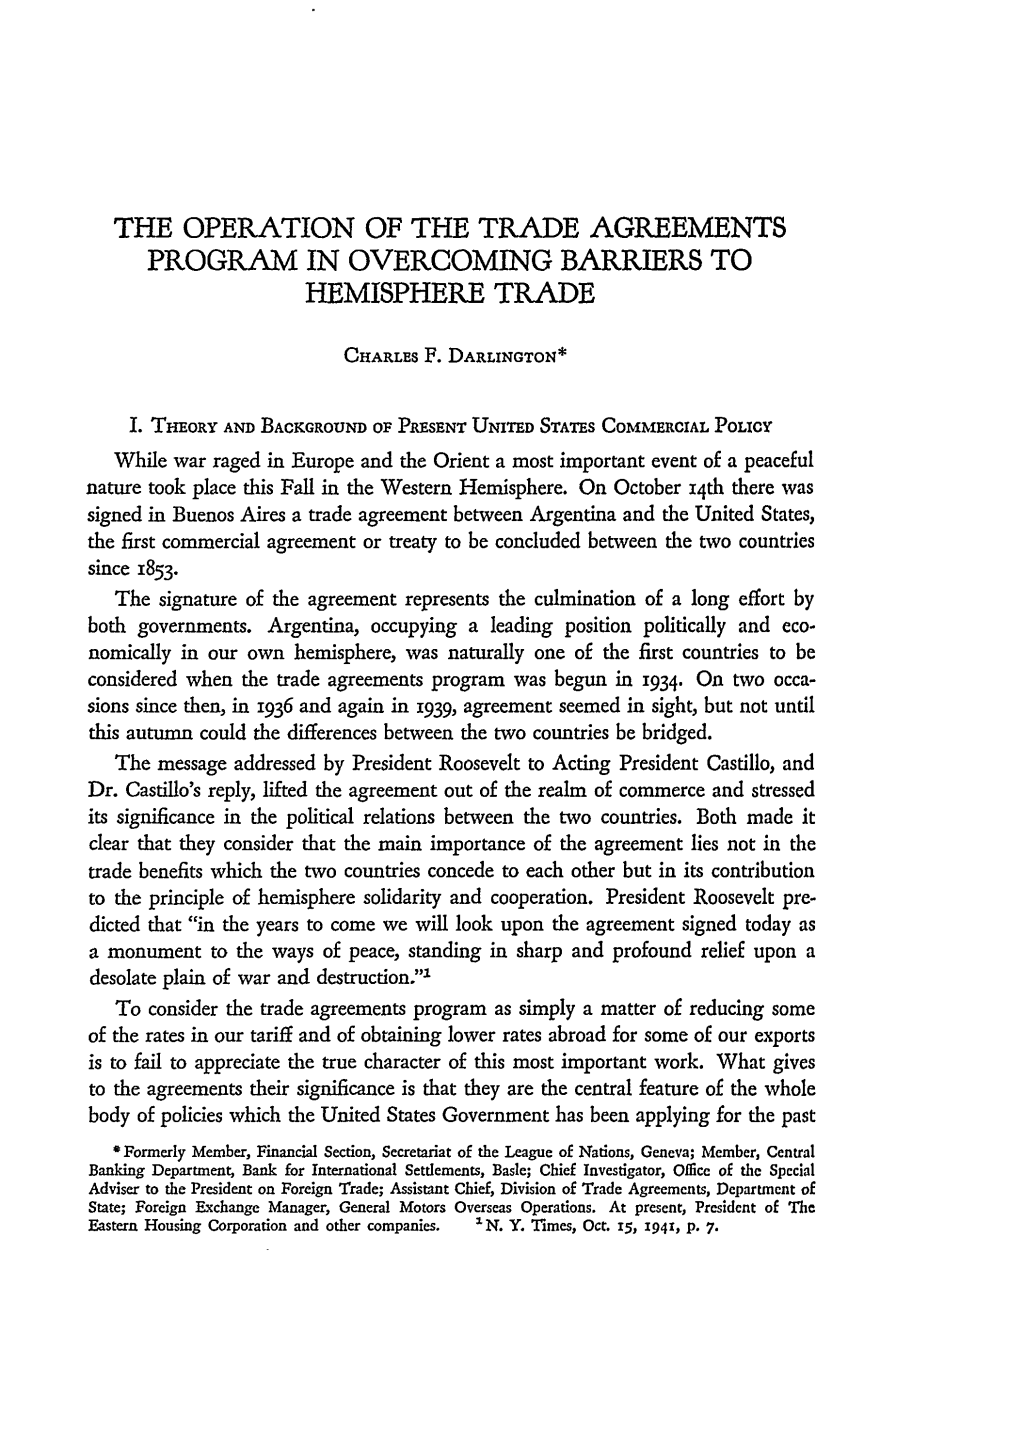 The Operation of the Trade Agreements Program in Overcoming Barriers to Hemisphere Trade